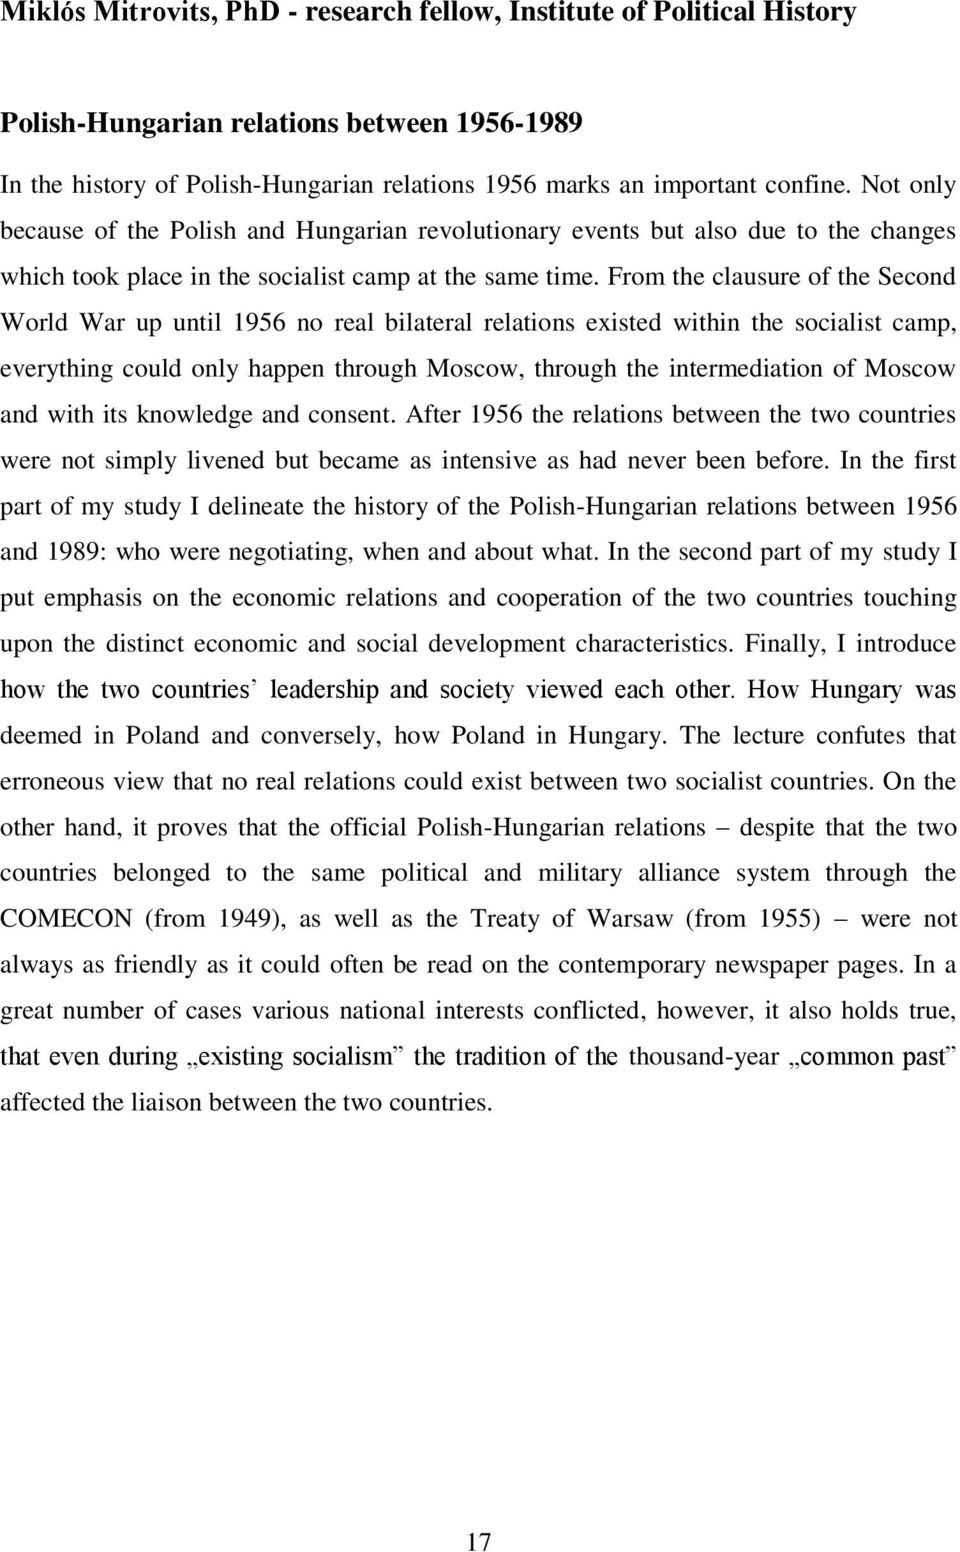 From the clausure of the Second World War up until 1956 no real bilateral relations existed within the socialist camp, everything could only happen through Moscow, through the intermediation of